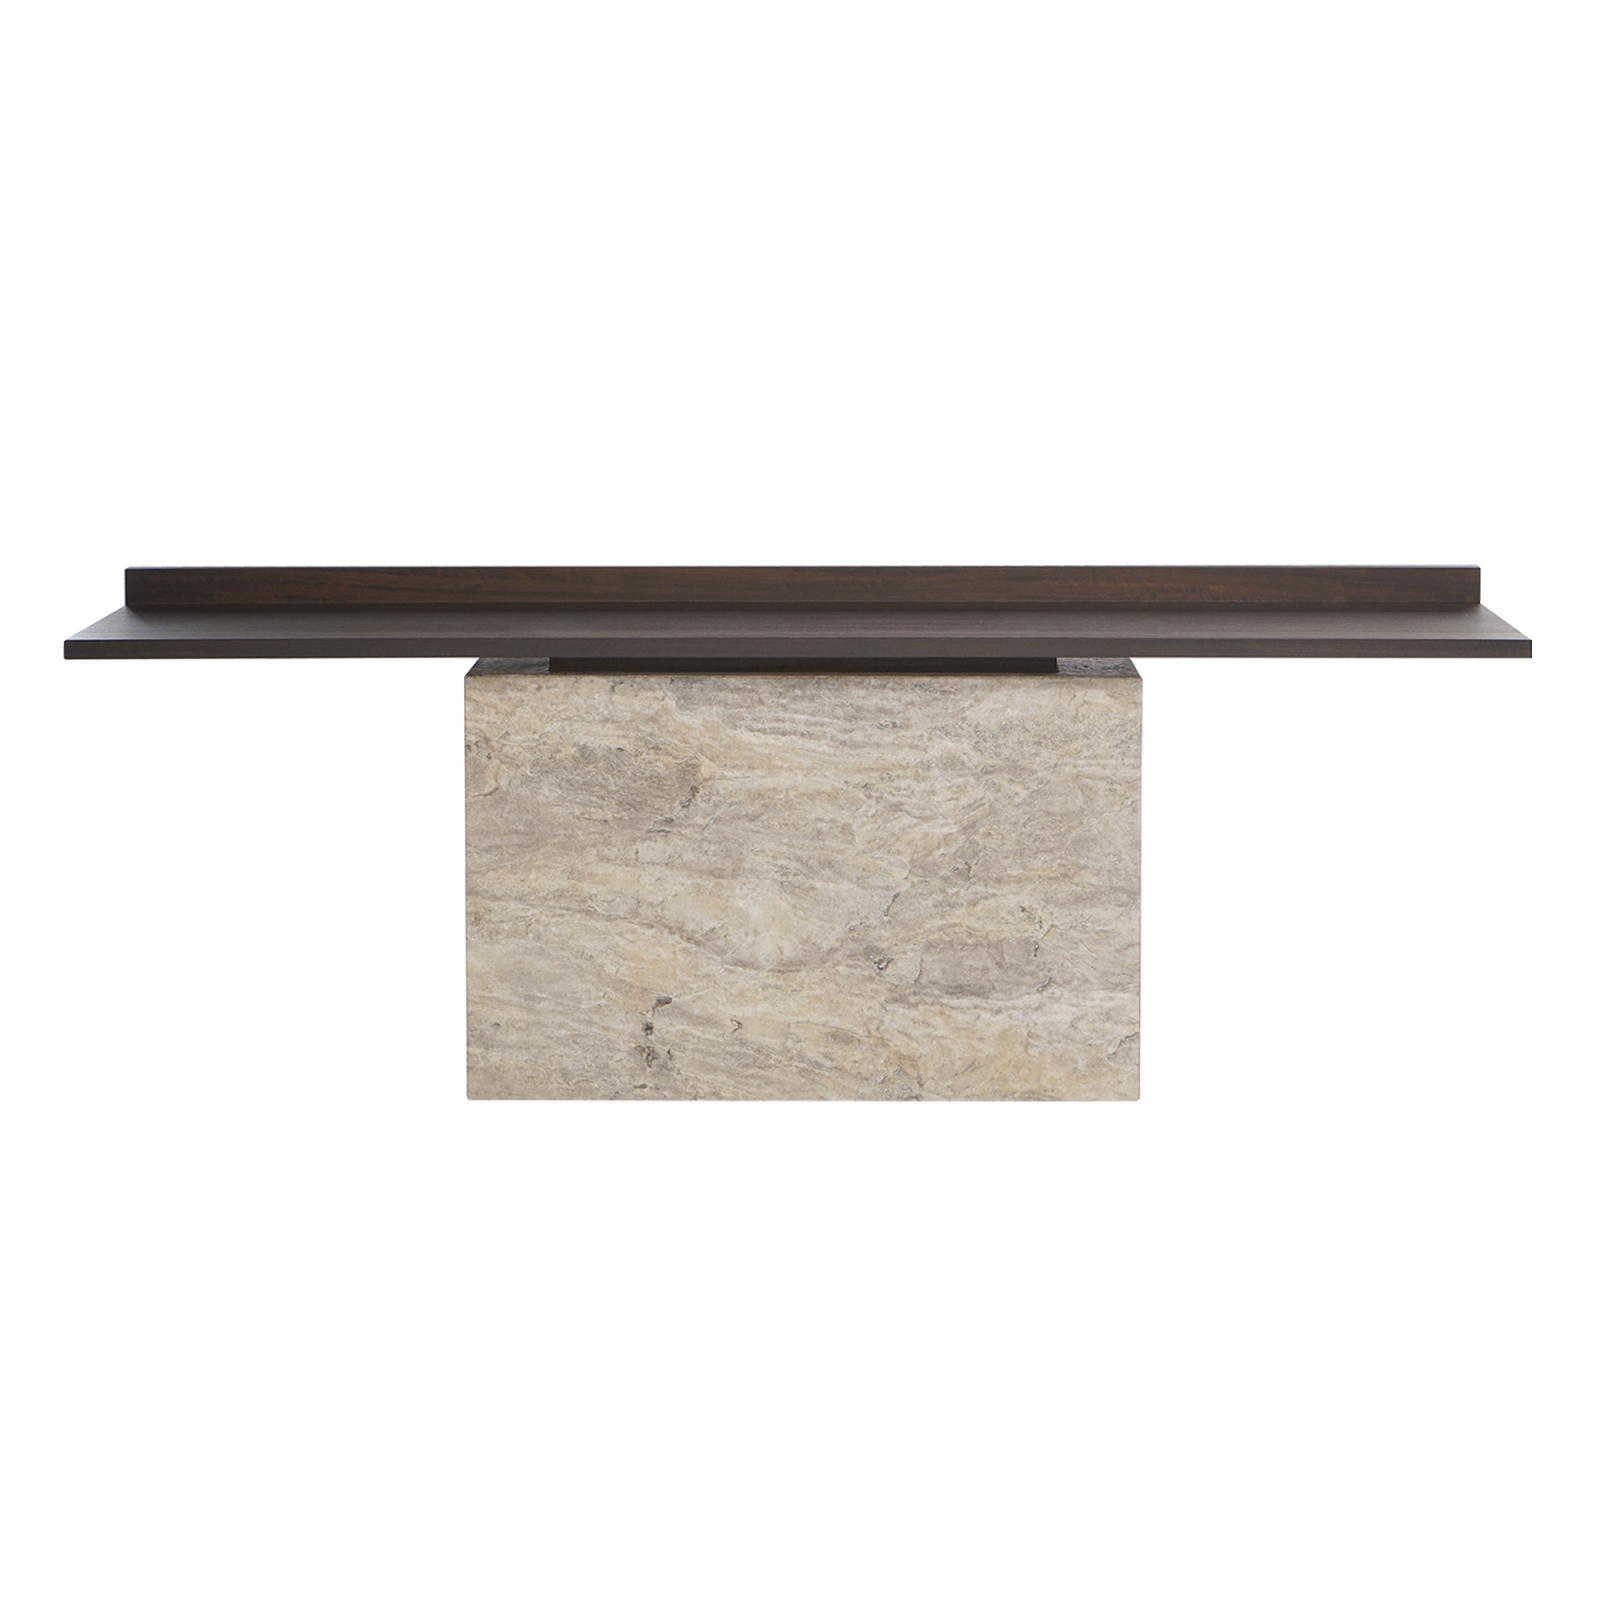 Latitude dresser, consisting of a marble body and wooden surface, stands in front of a white wall.